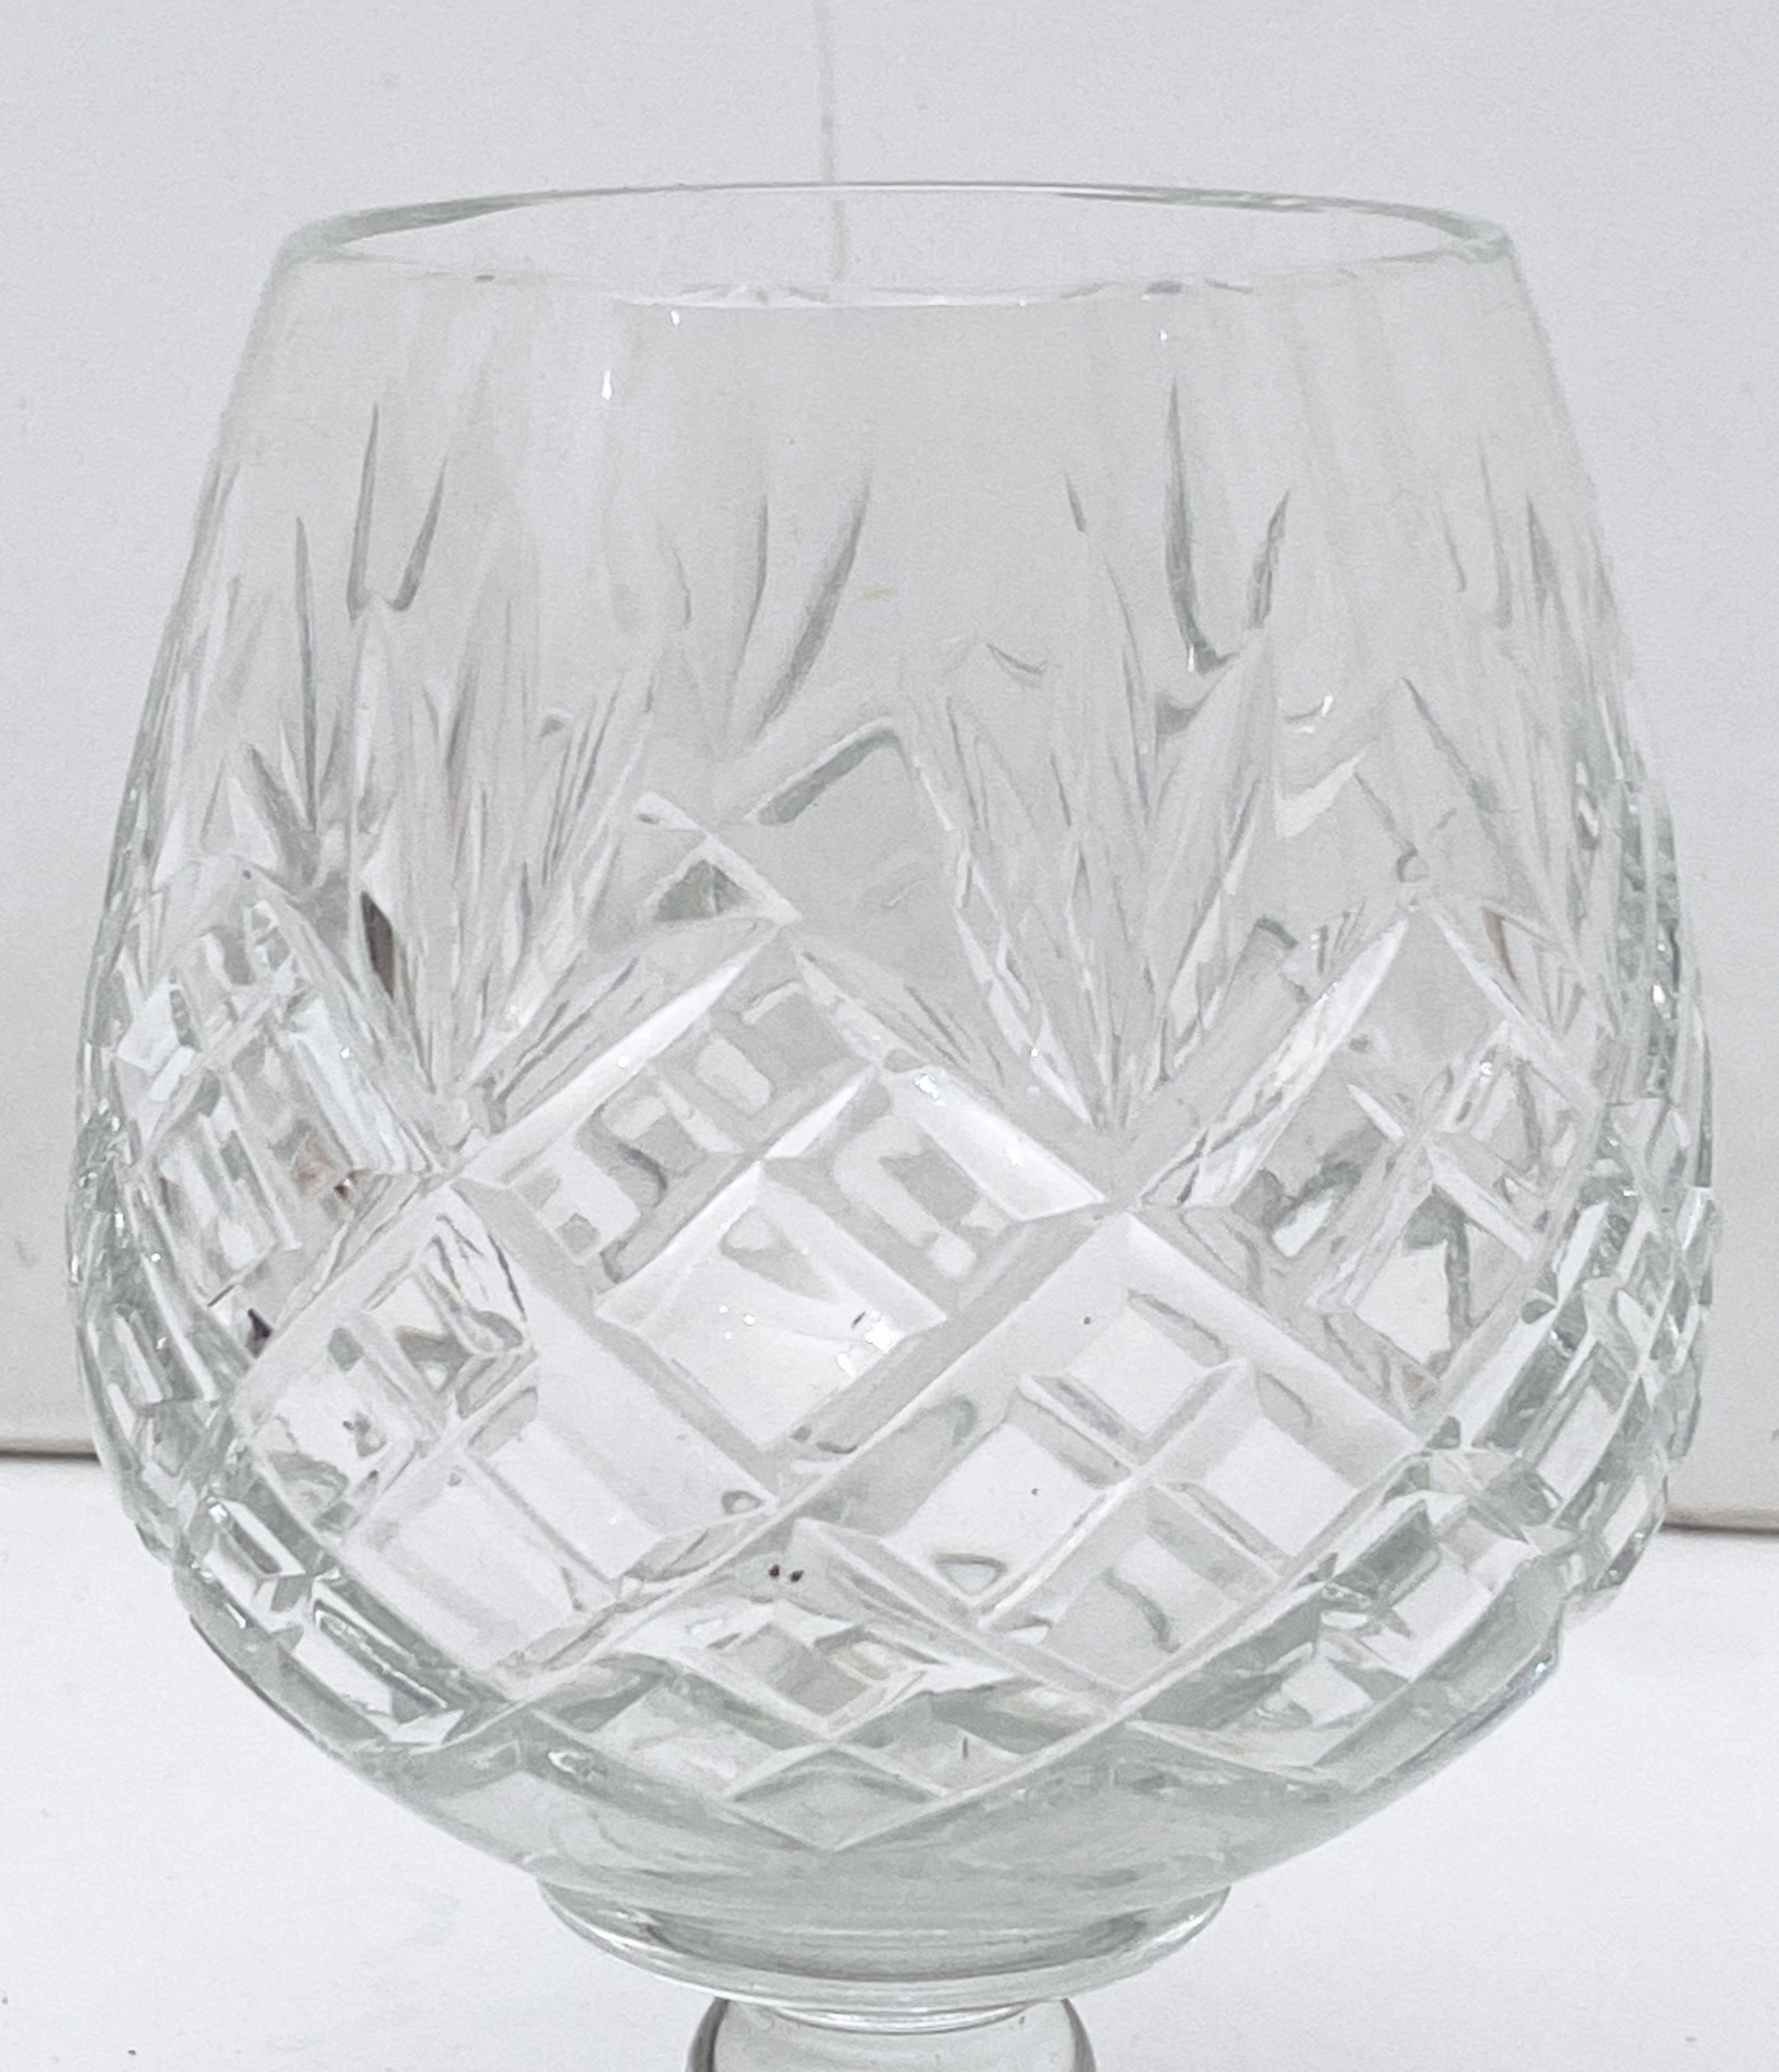 English Silver Brandy Warmer with Cut Crystal Glass Snifter 3